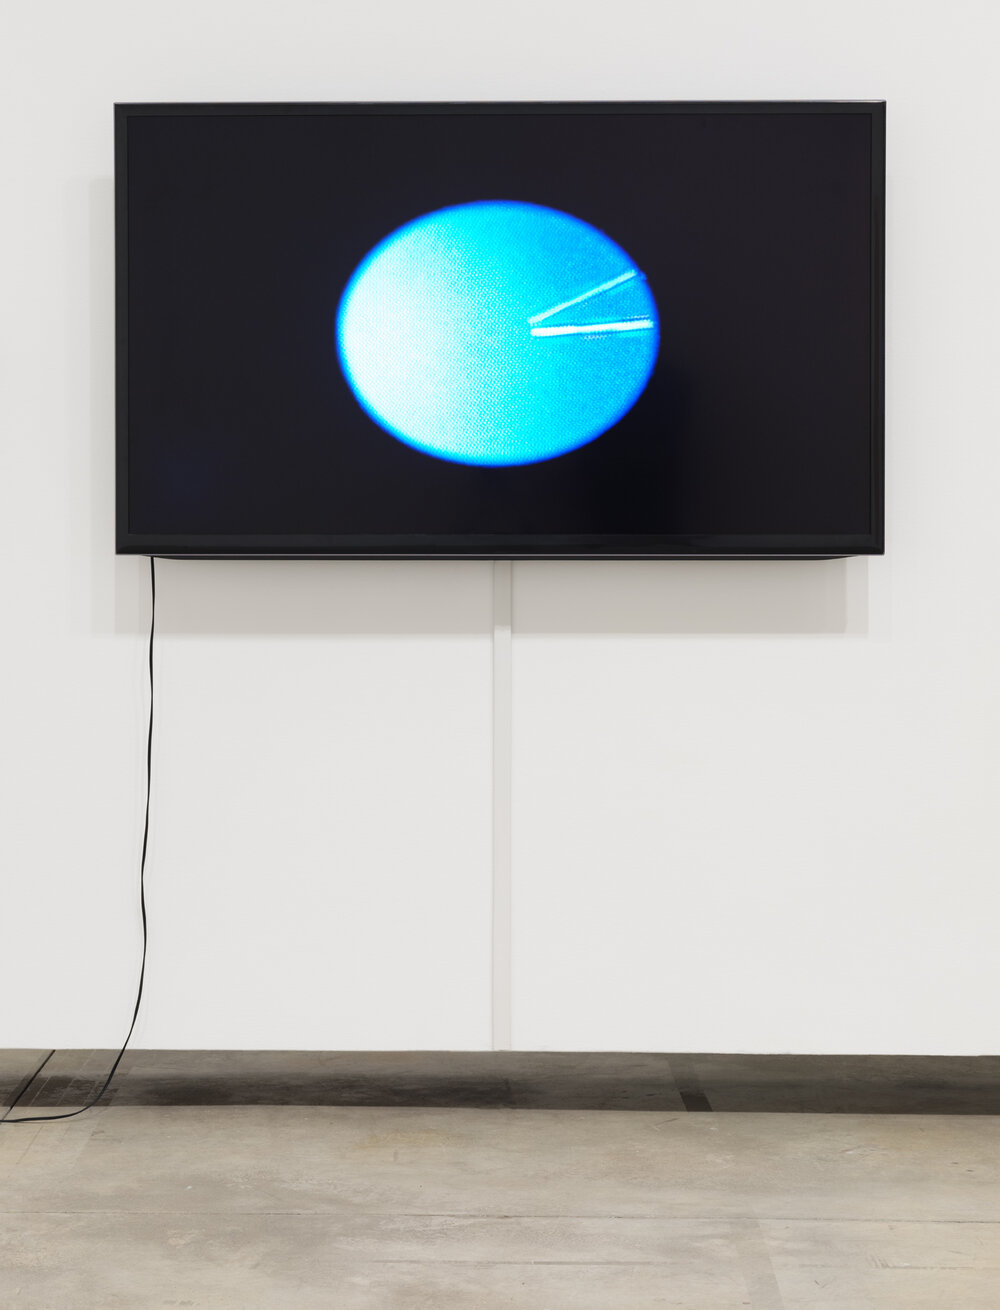  Kite,  L-sys visualization,   Listener , 2018, video. Collection of the artist. Installed at the Morris and Helen Belkin Art Gallery, University of British Columbia. Photo: Rachel Topham Photography. 